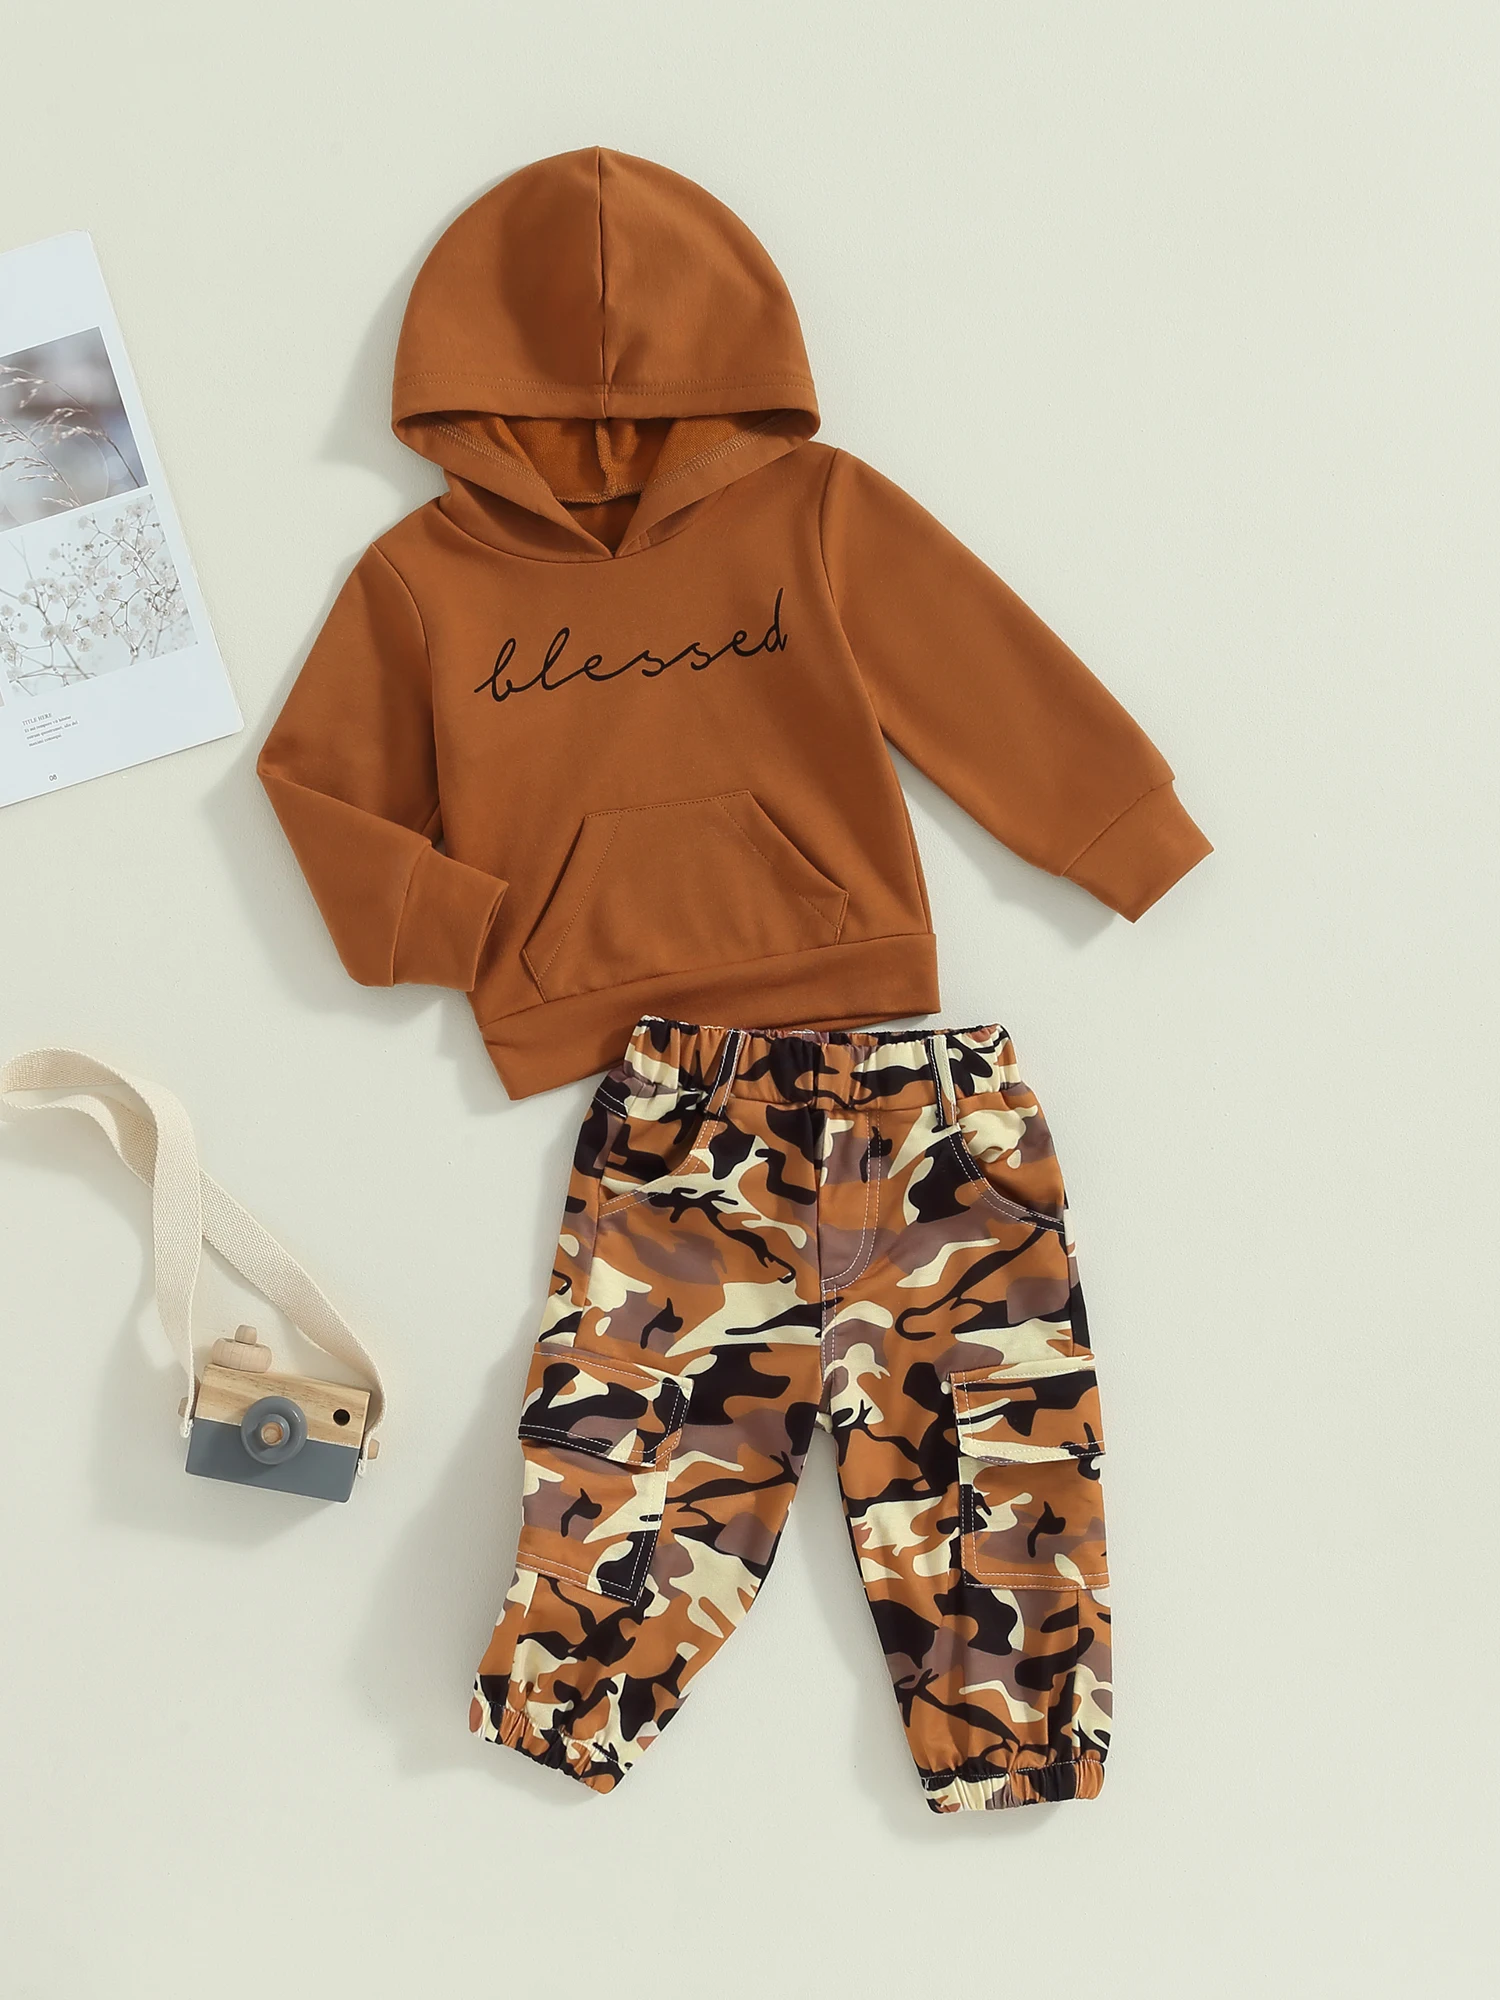 

Adorable Toddler Girl Winter Clothes Set with Blessed Hoodie and Camo Pants - Perfect Tracksuit for Your Little Princess